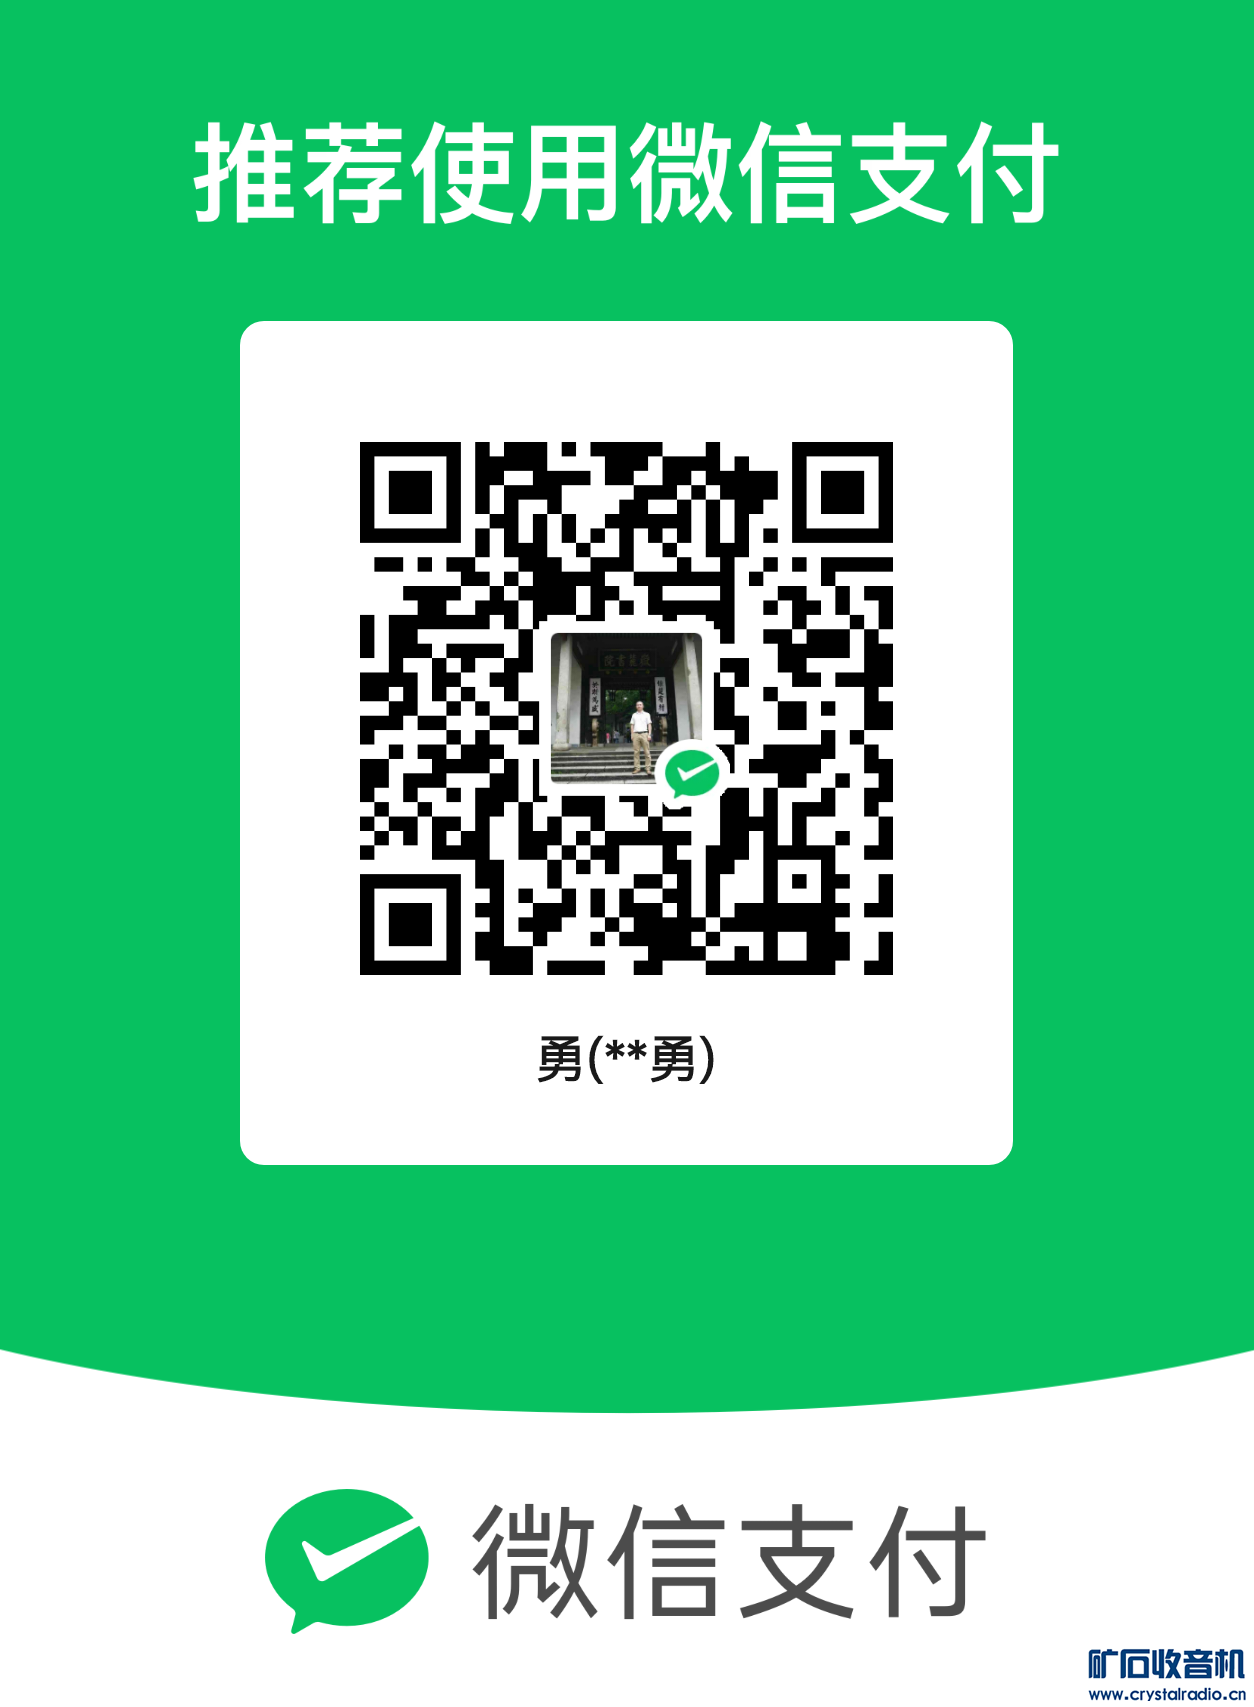 mm_facetoface_collect_qrcode_1680652497461.png